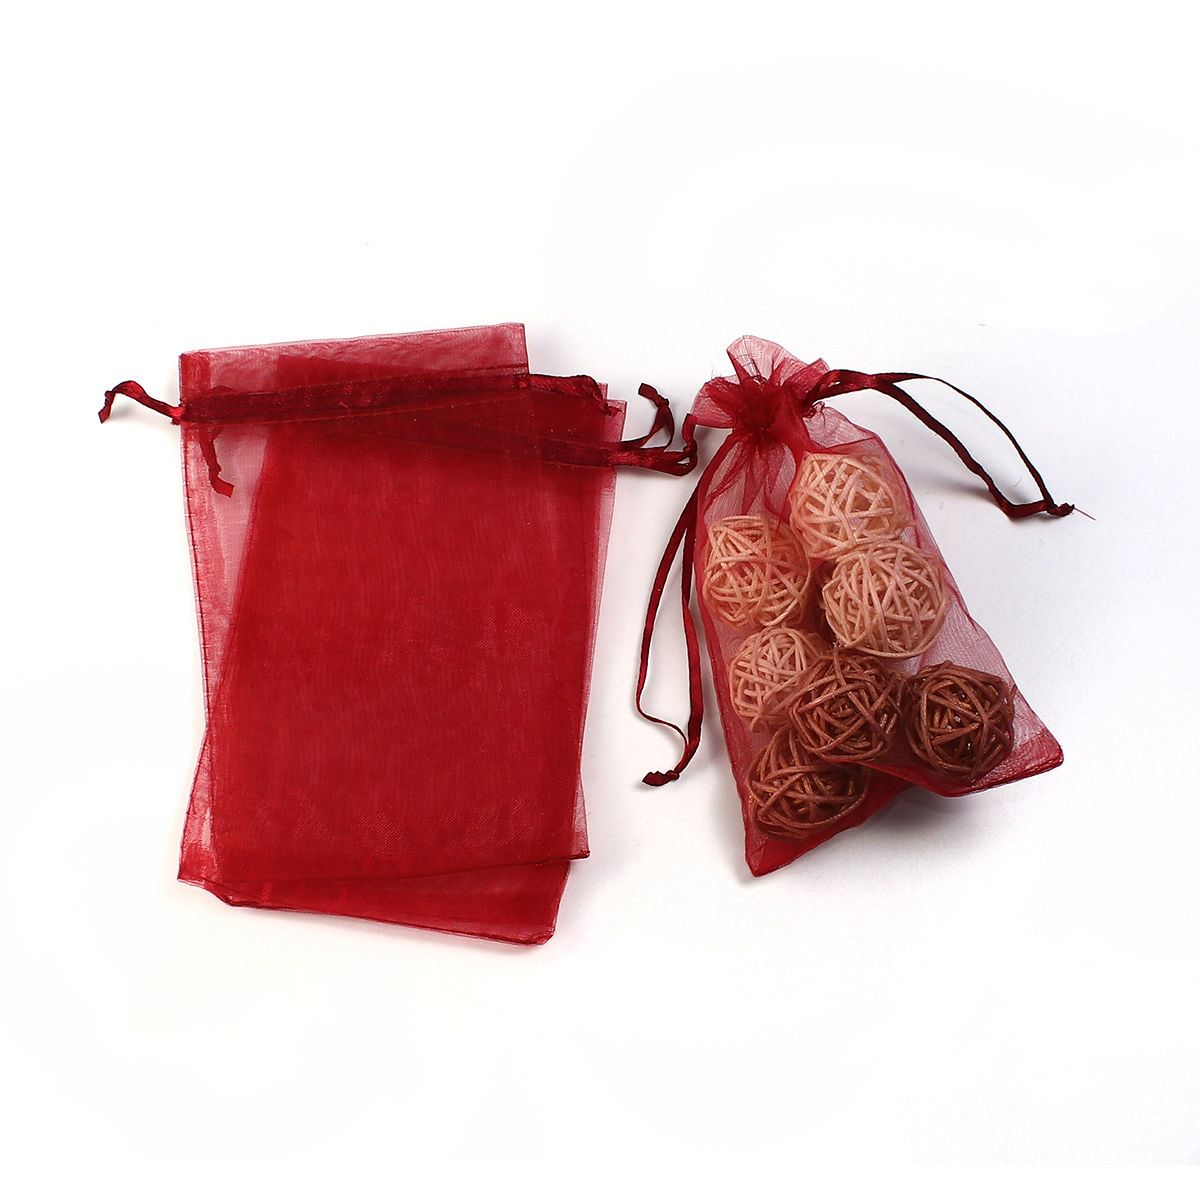 Picture of Wedding Gift Organza Jewelry Bags Drawstring Rectangle Wine Red (Usable Space: 13x10cm) 15cm(5 7/8") x 10cm(3 7/8"), 20 PCs